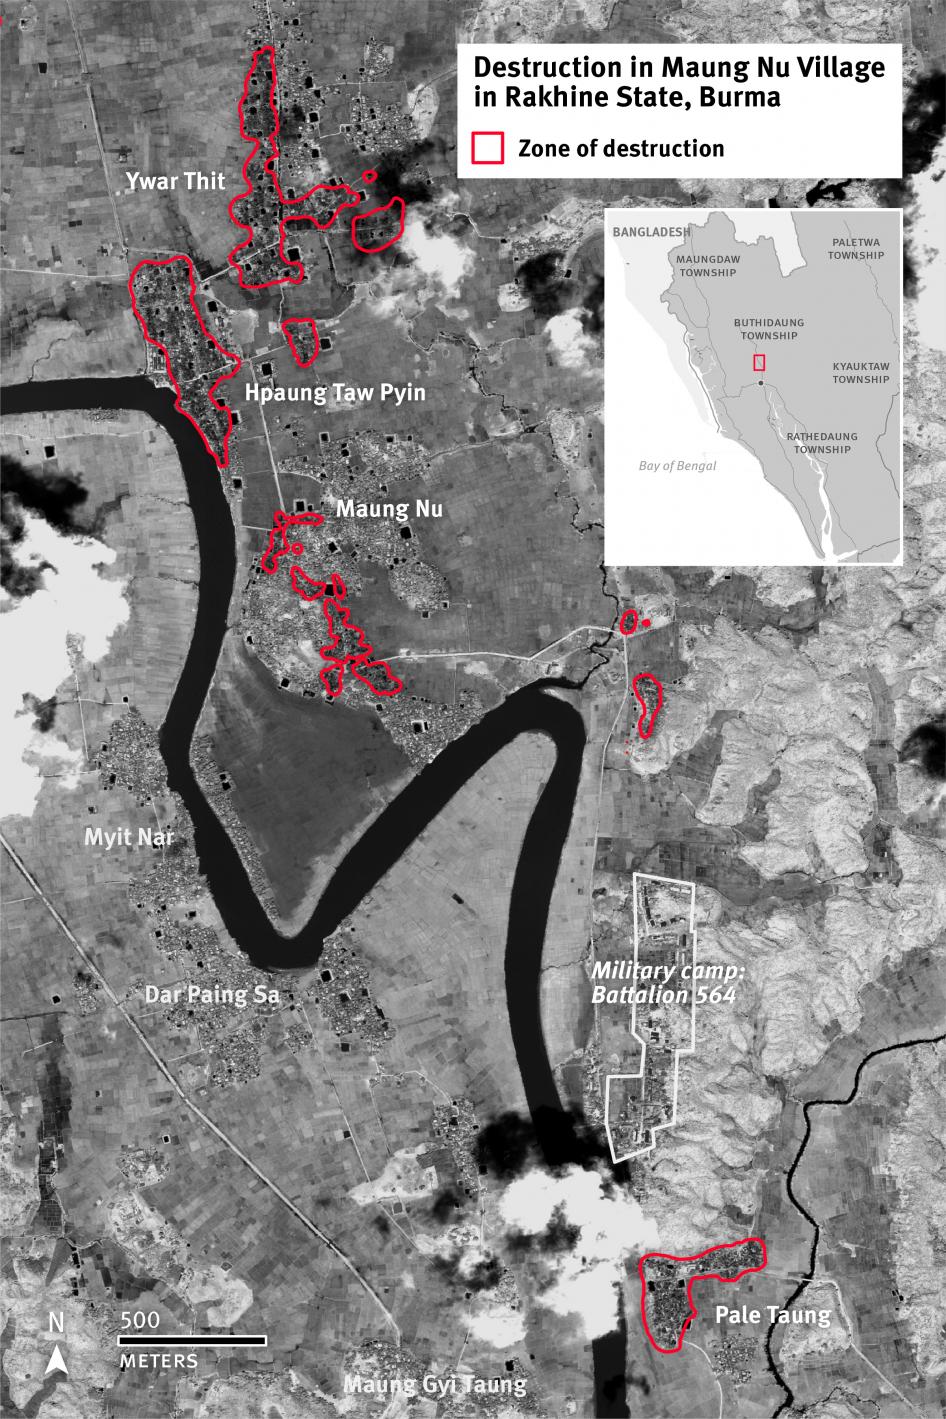 Satellite imagery showing the destruction in Maung Nu Village, Rakhine State, since August 2017. © 2017 Human Rights Watch